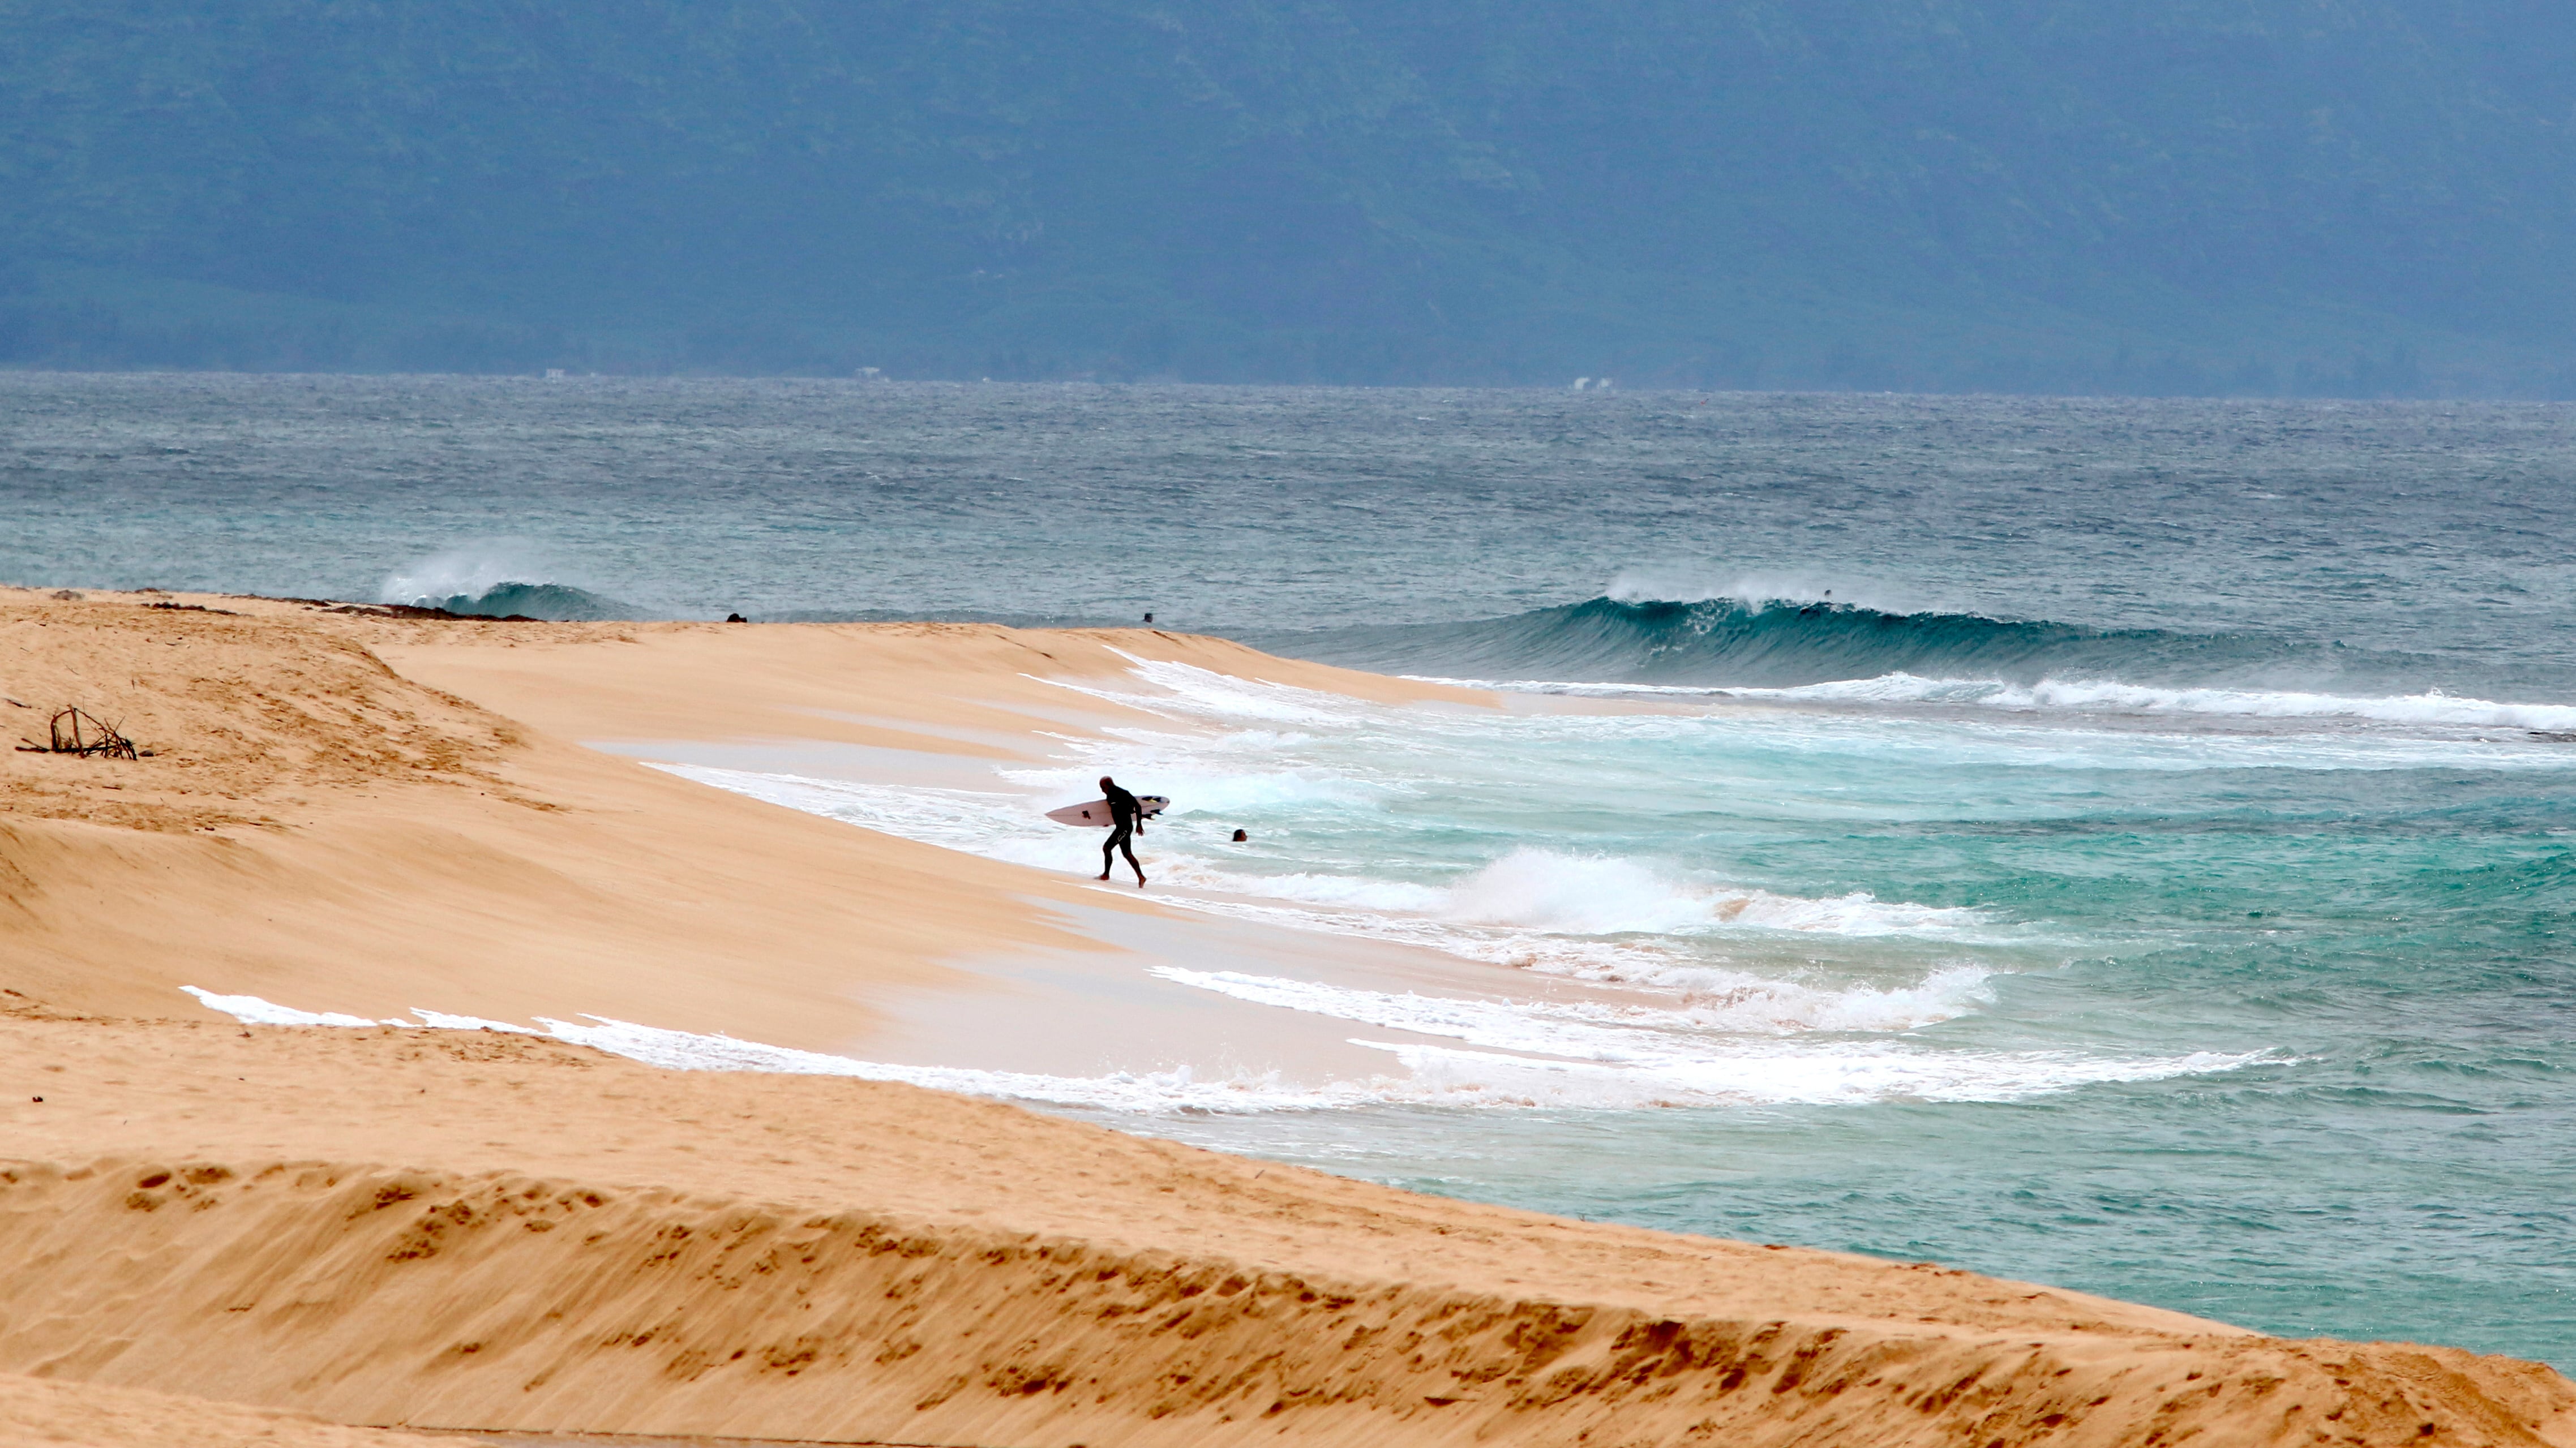 A professional lifeguard died after he was attacked by a shark while surfing off the island of Oahu in Hawaii (AP)